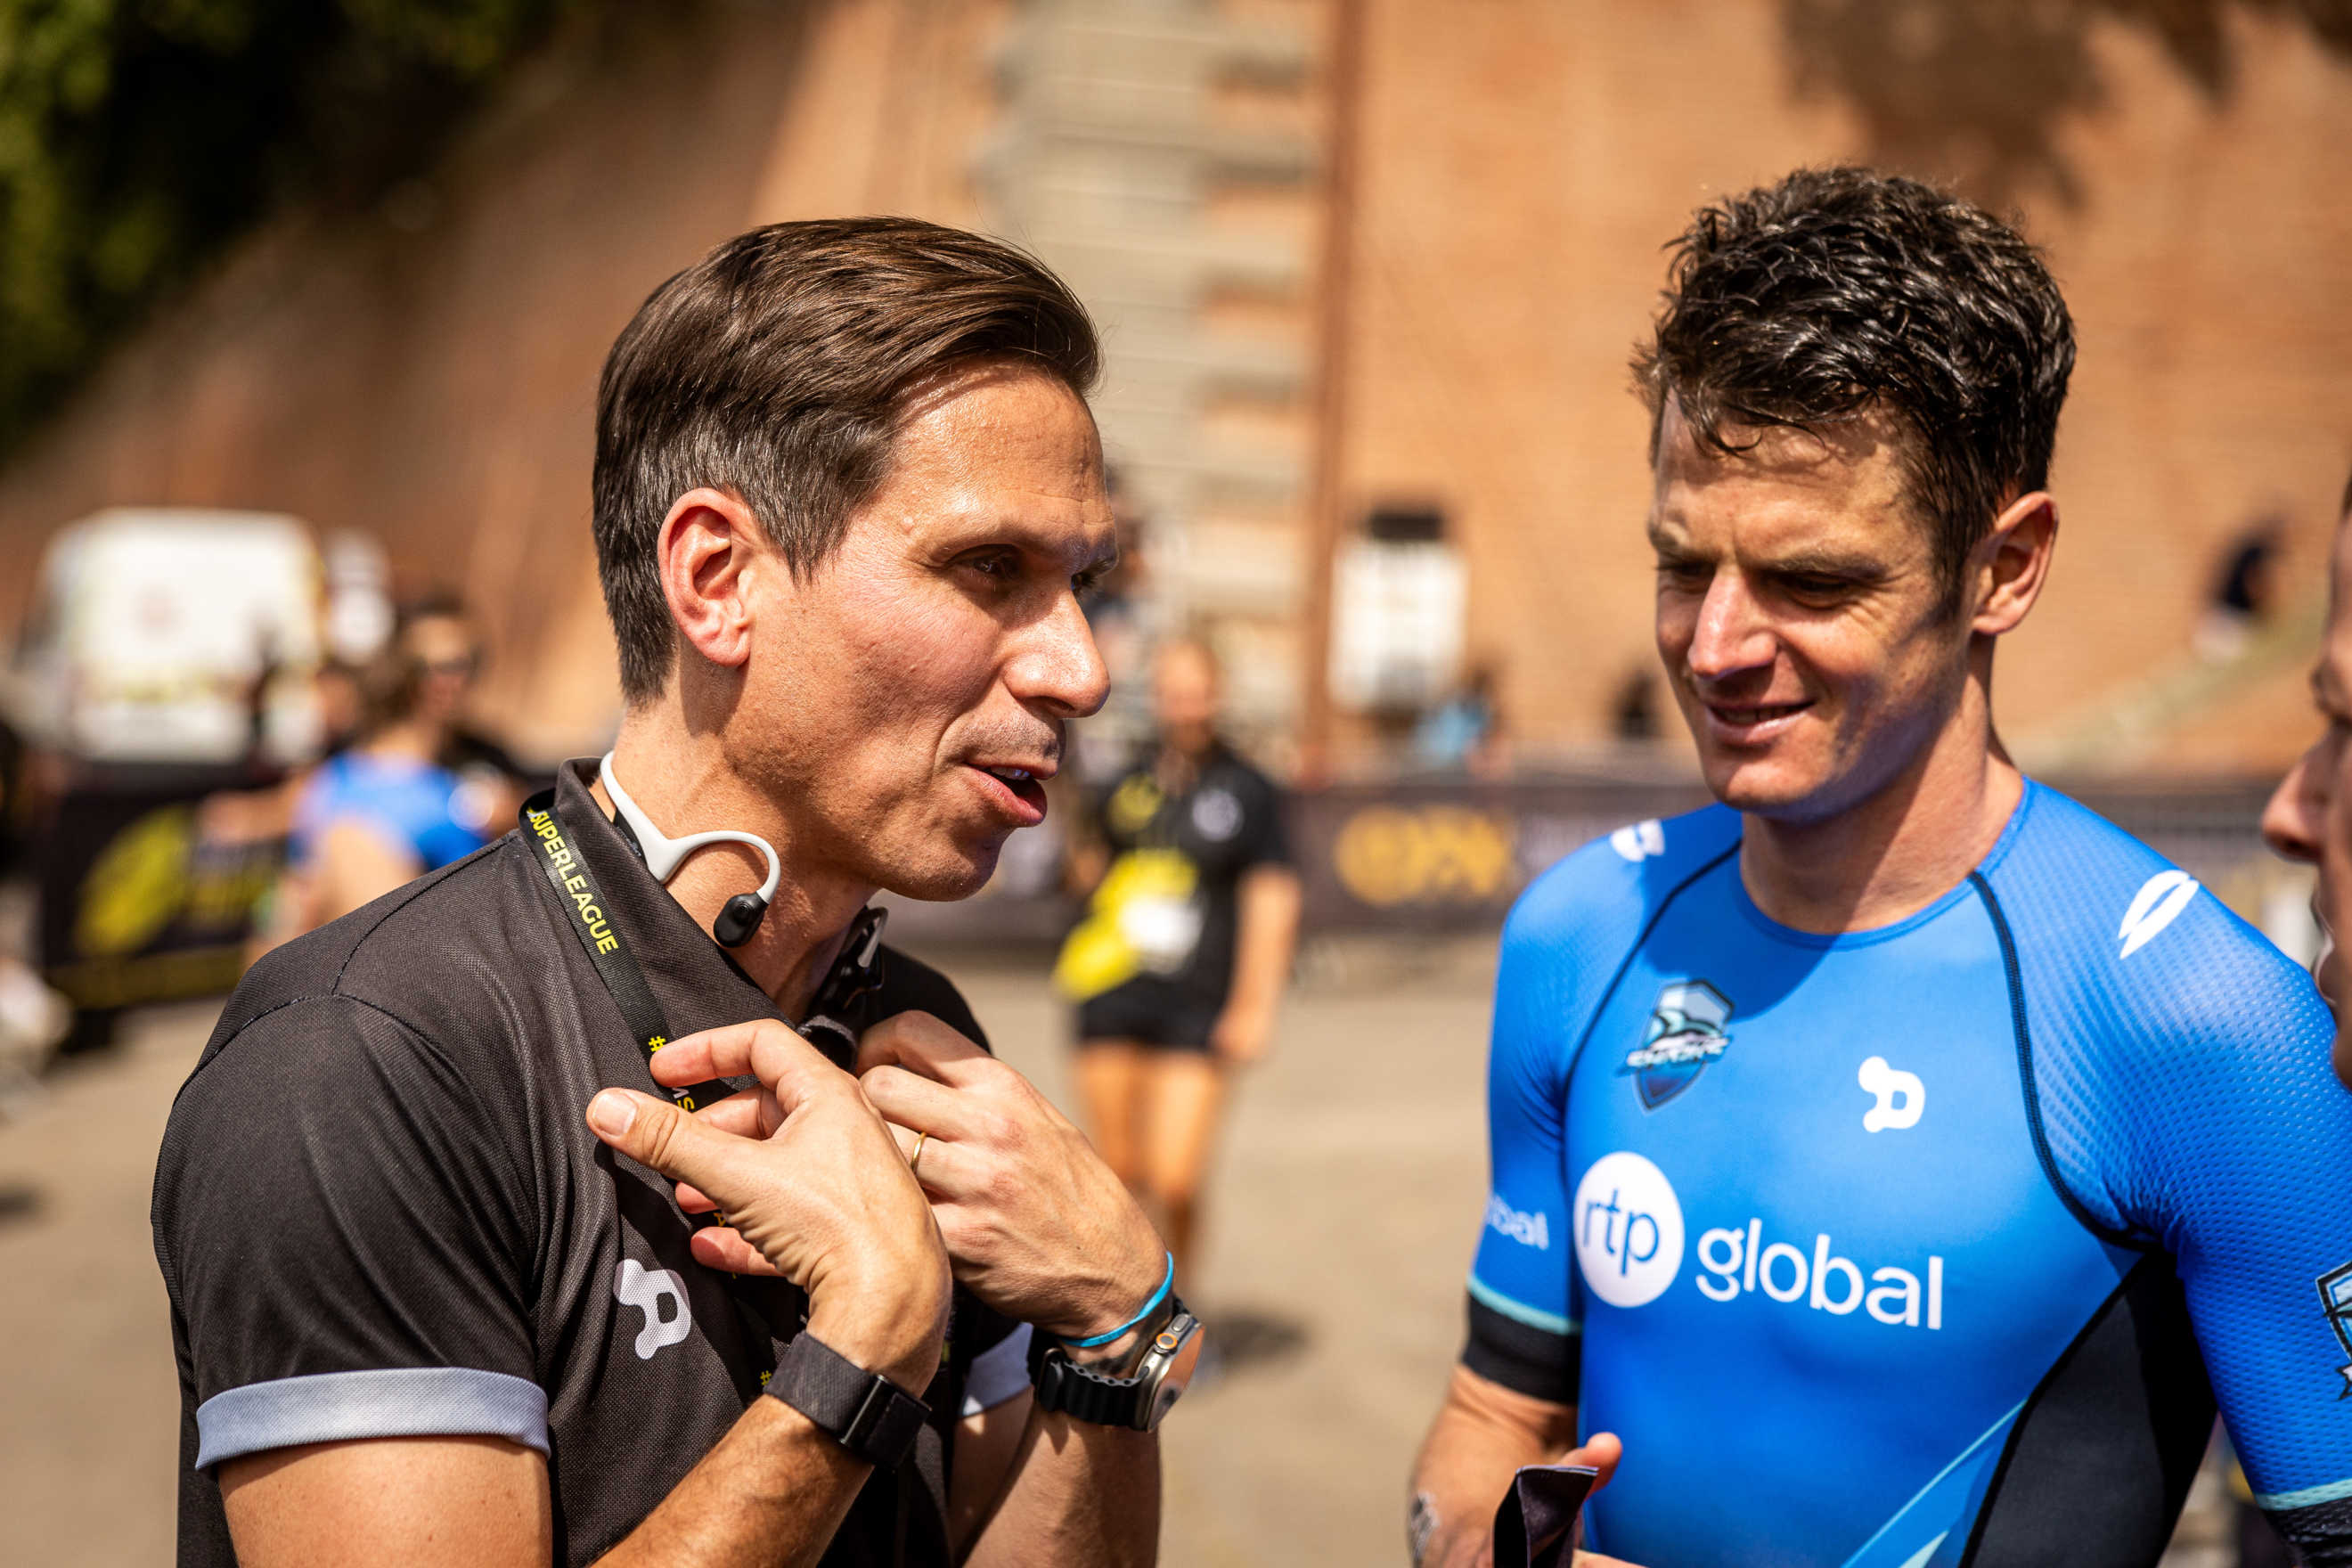 Michael Dhulst and Jonny Brownlee